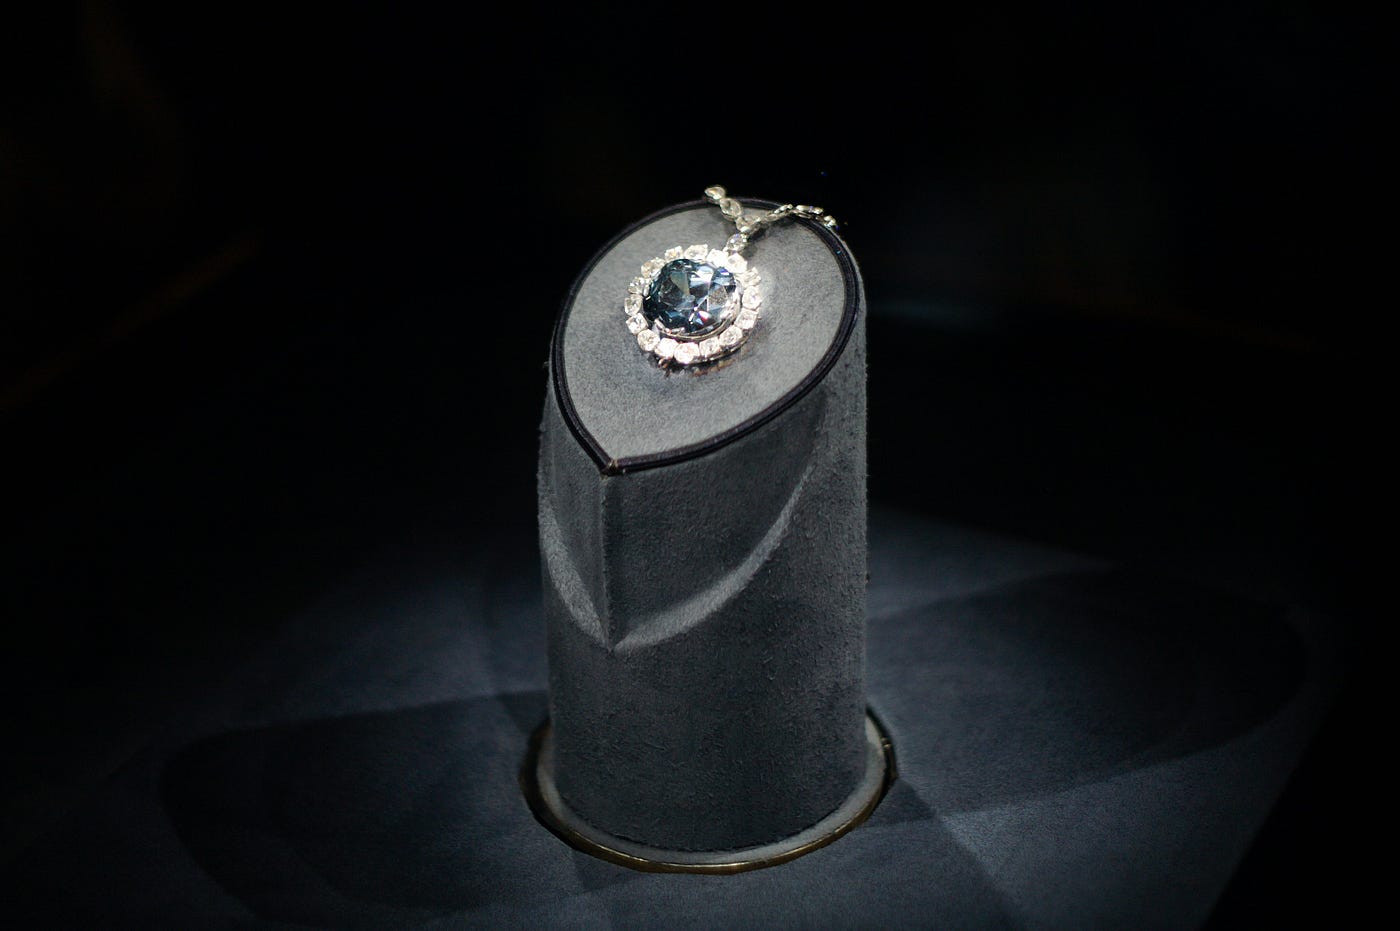 The Hope Diamond is thought to carry a curse from Louis XIV to an